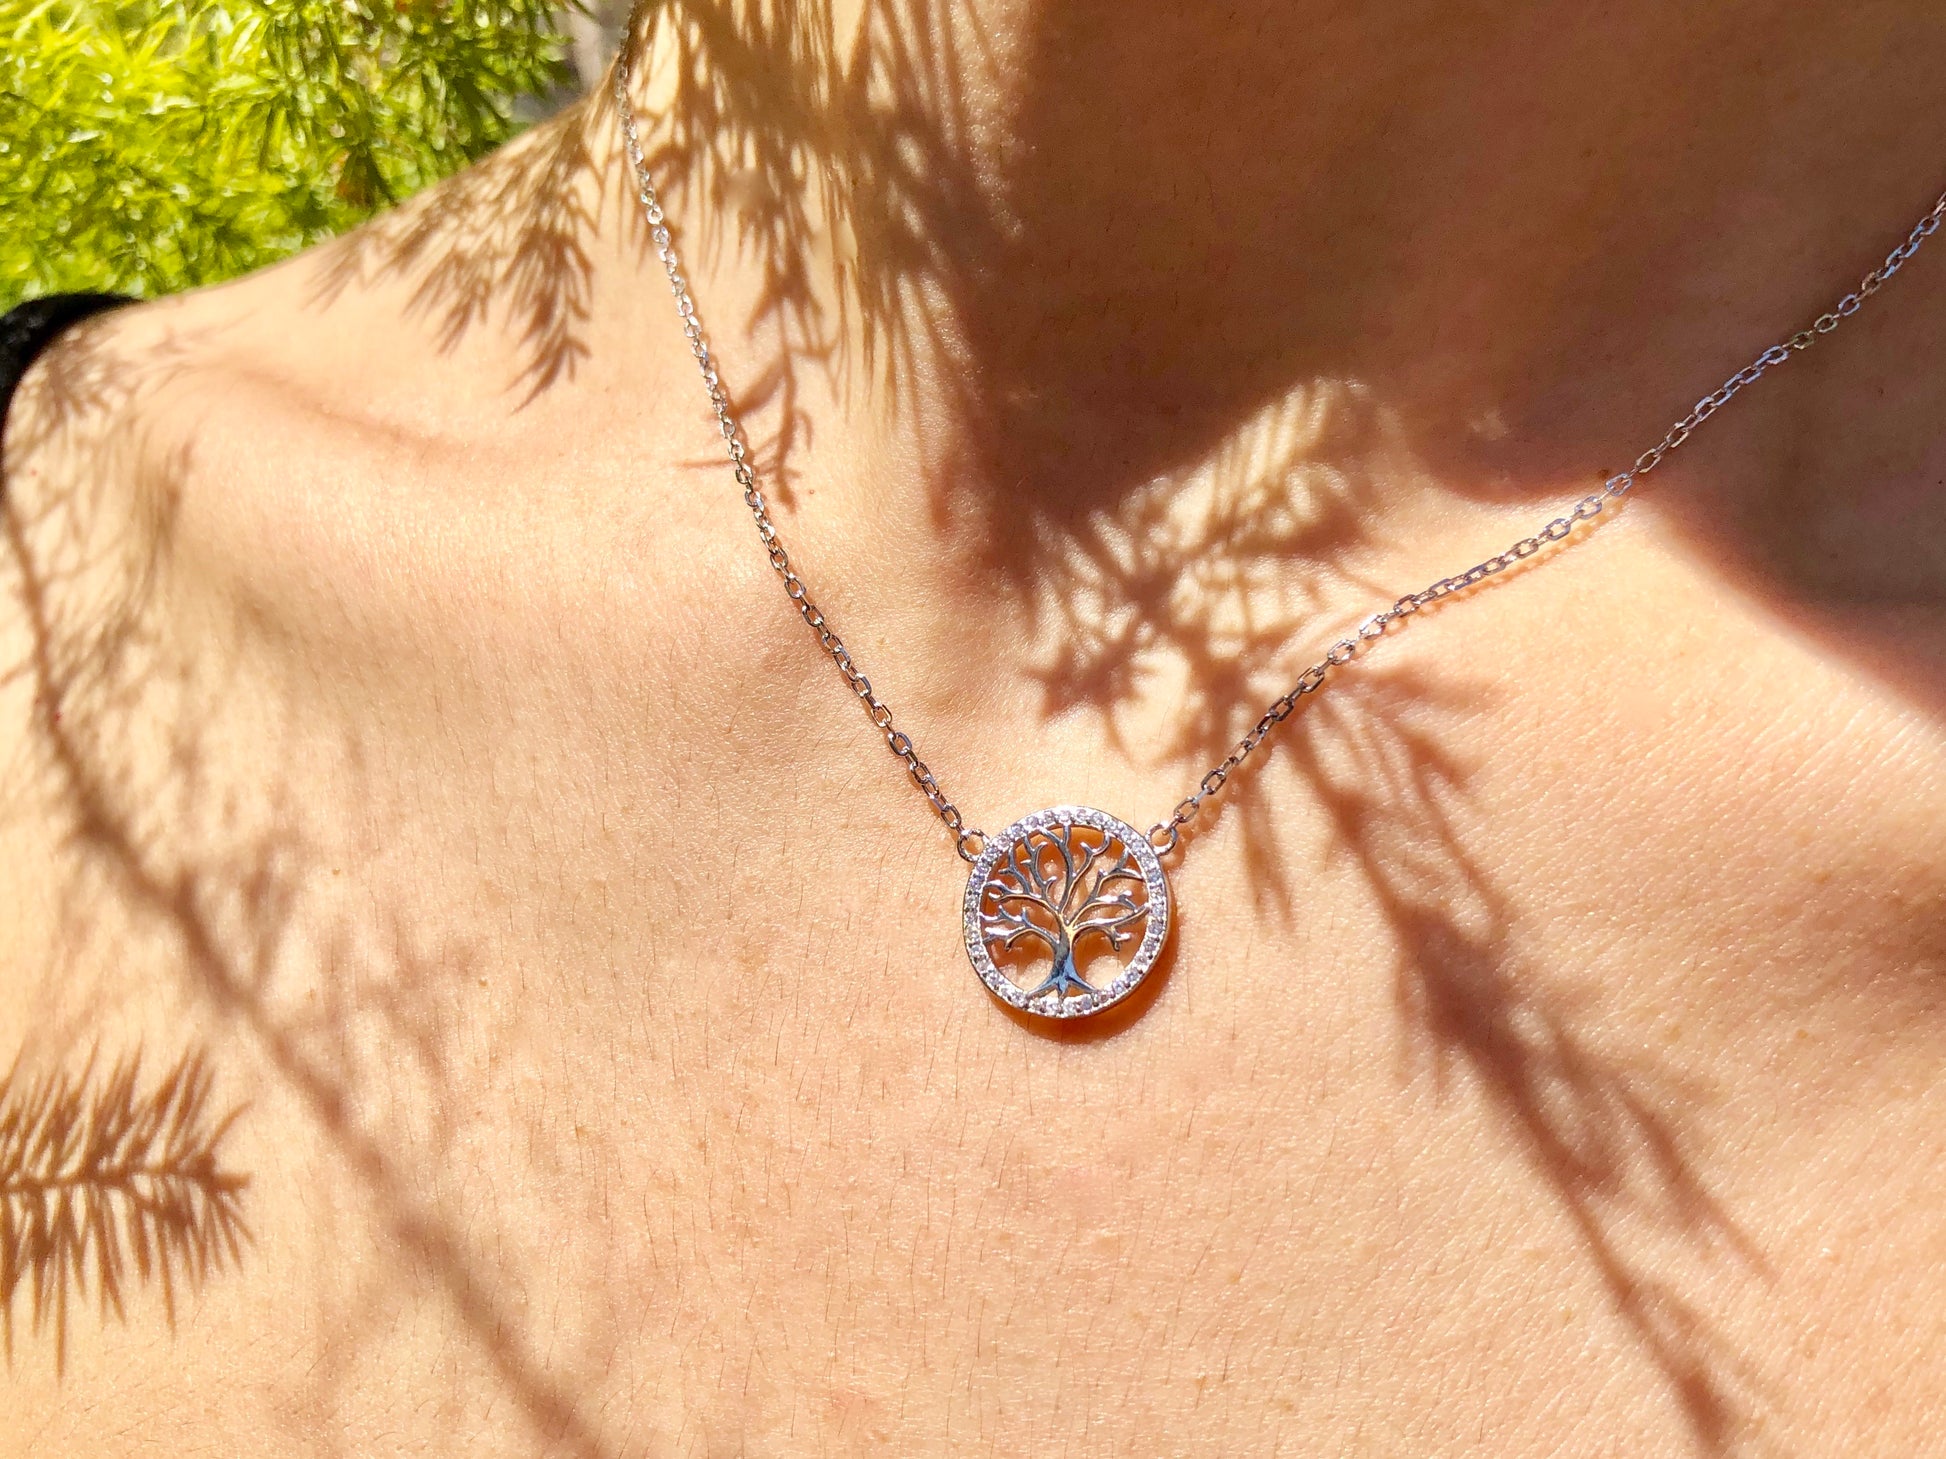 Ode to wellness, our elegant pendant featuring a Tree of Life charm, crafted in solid 925 Sterling silver and plated in white-gold.   Material: Sterling Silver Plating: White-gold plated 